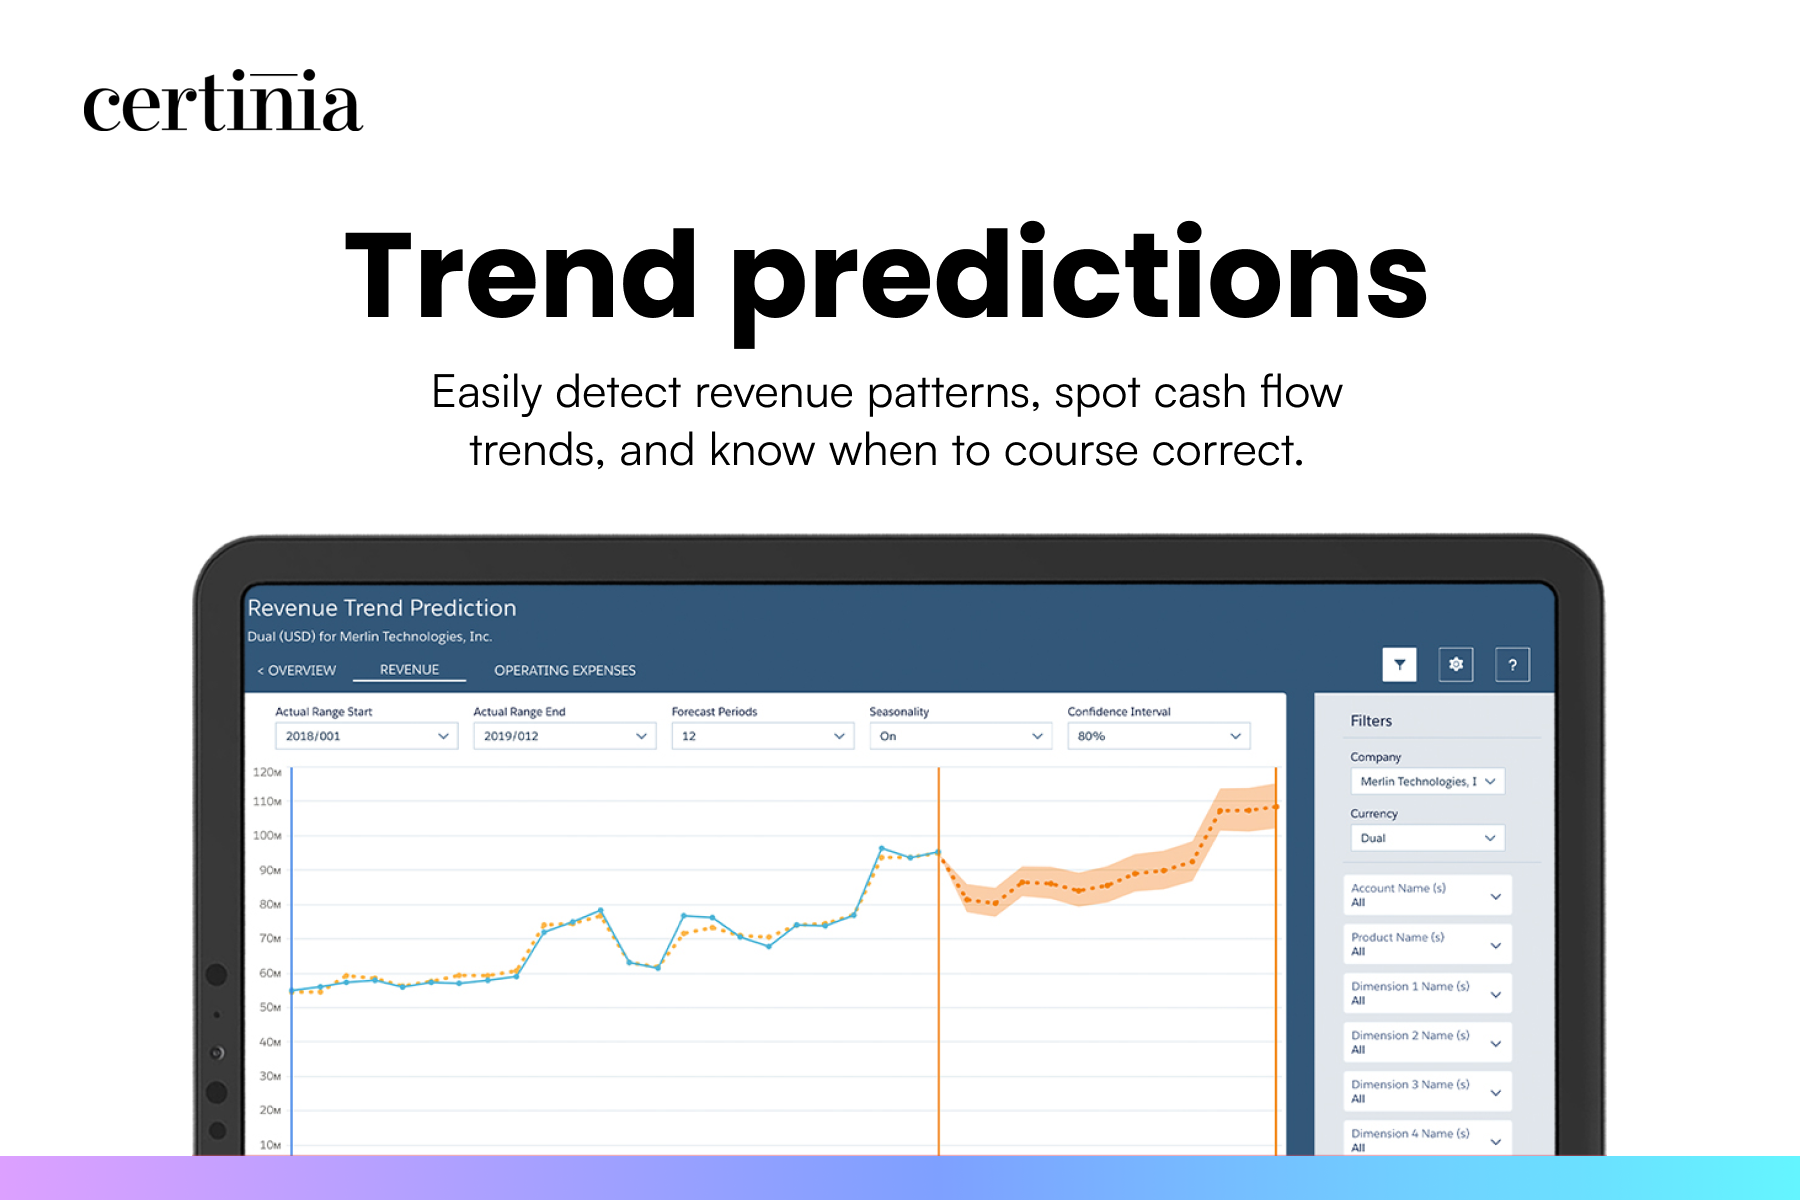 Easily detect revenue patterns, spot cash flow trends, and know when to course correct